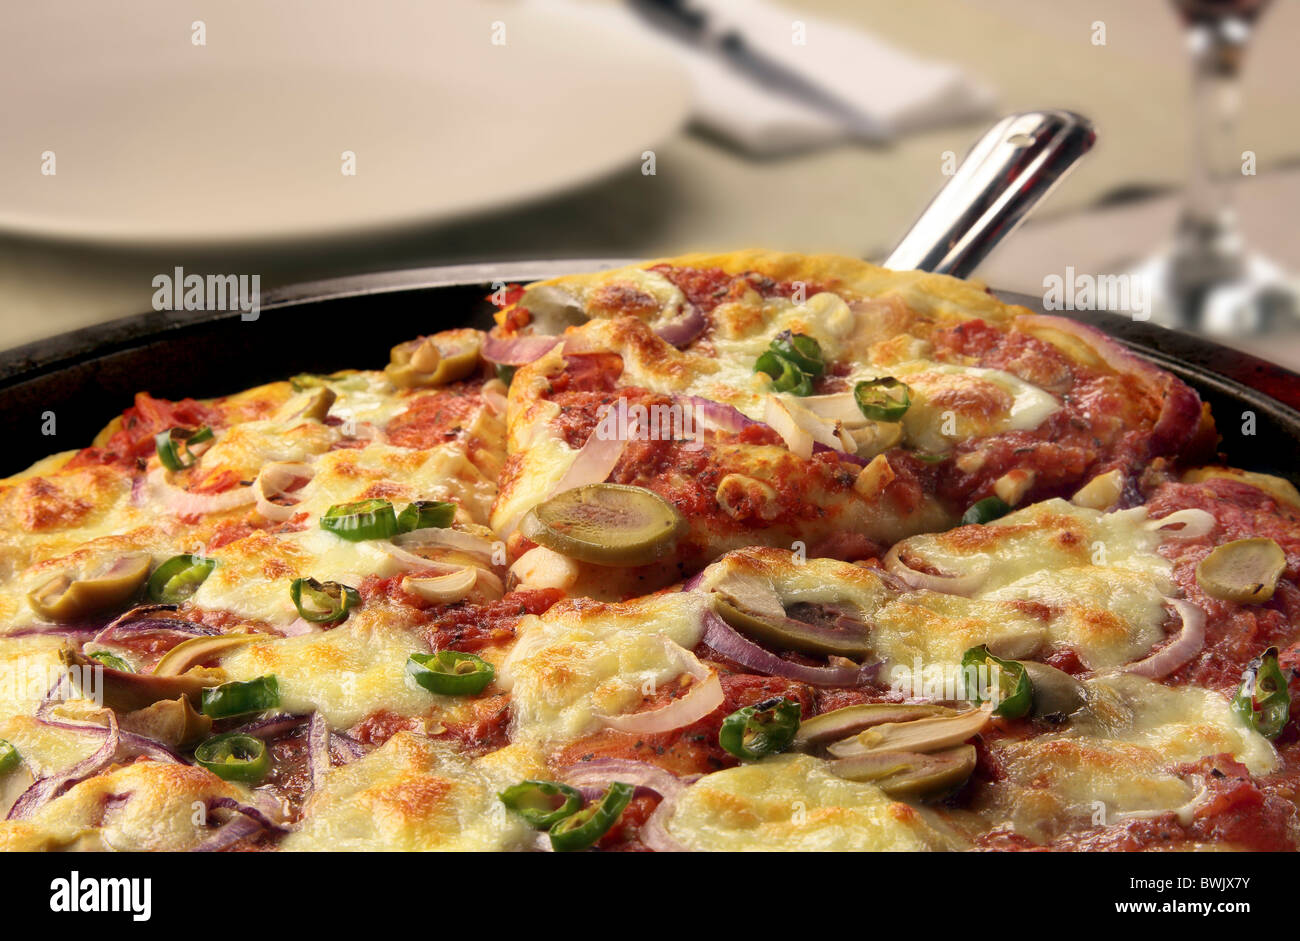 Pizza with mozzarella, red onion, olives and chilis Stock Photo